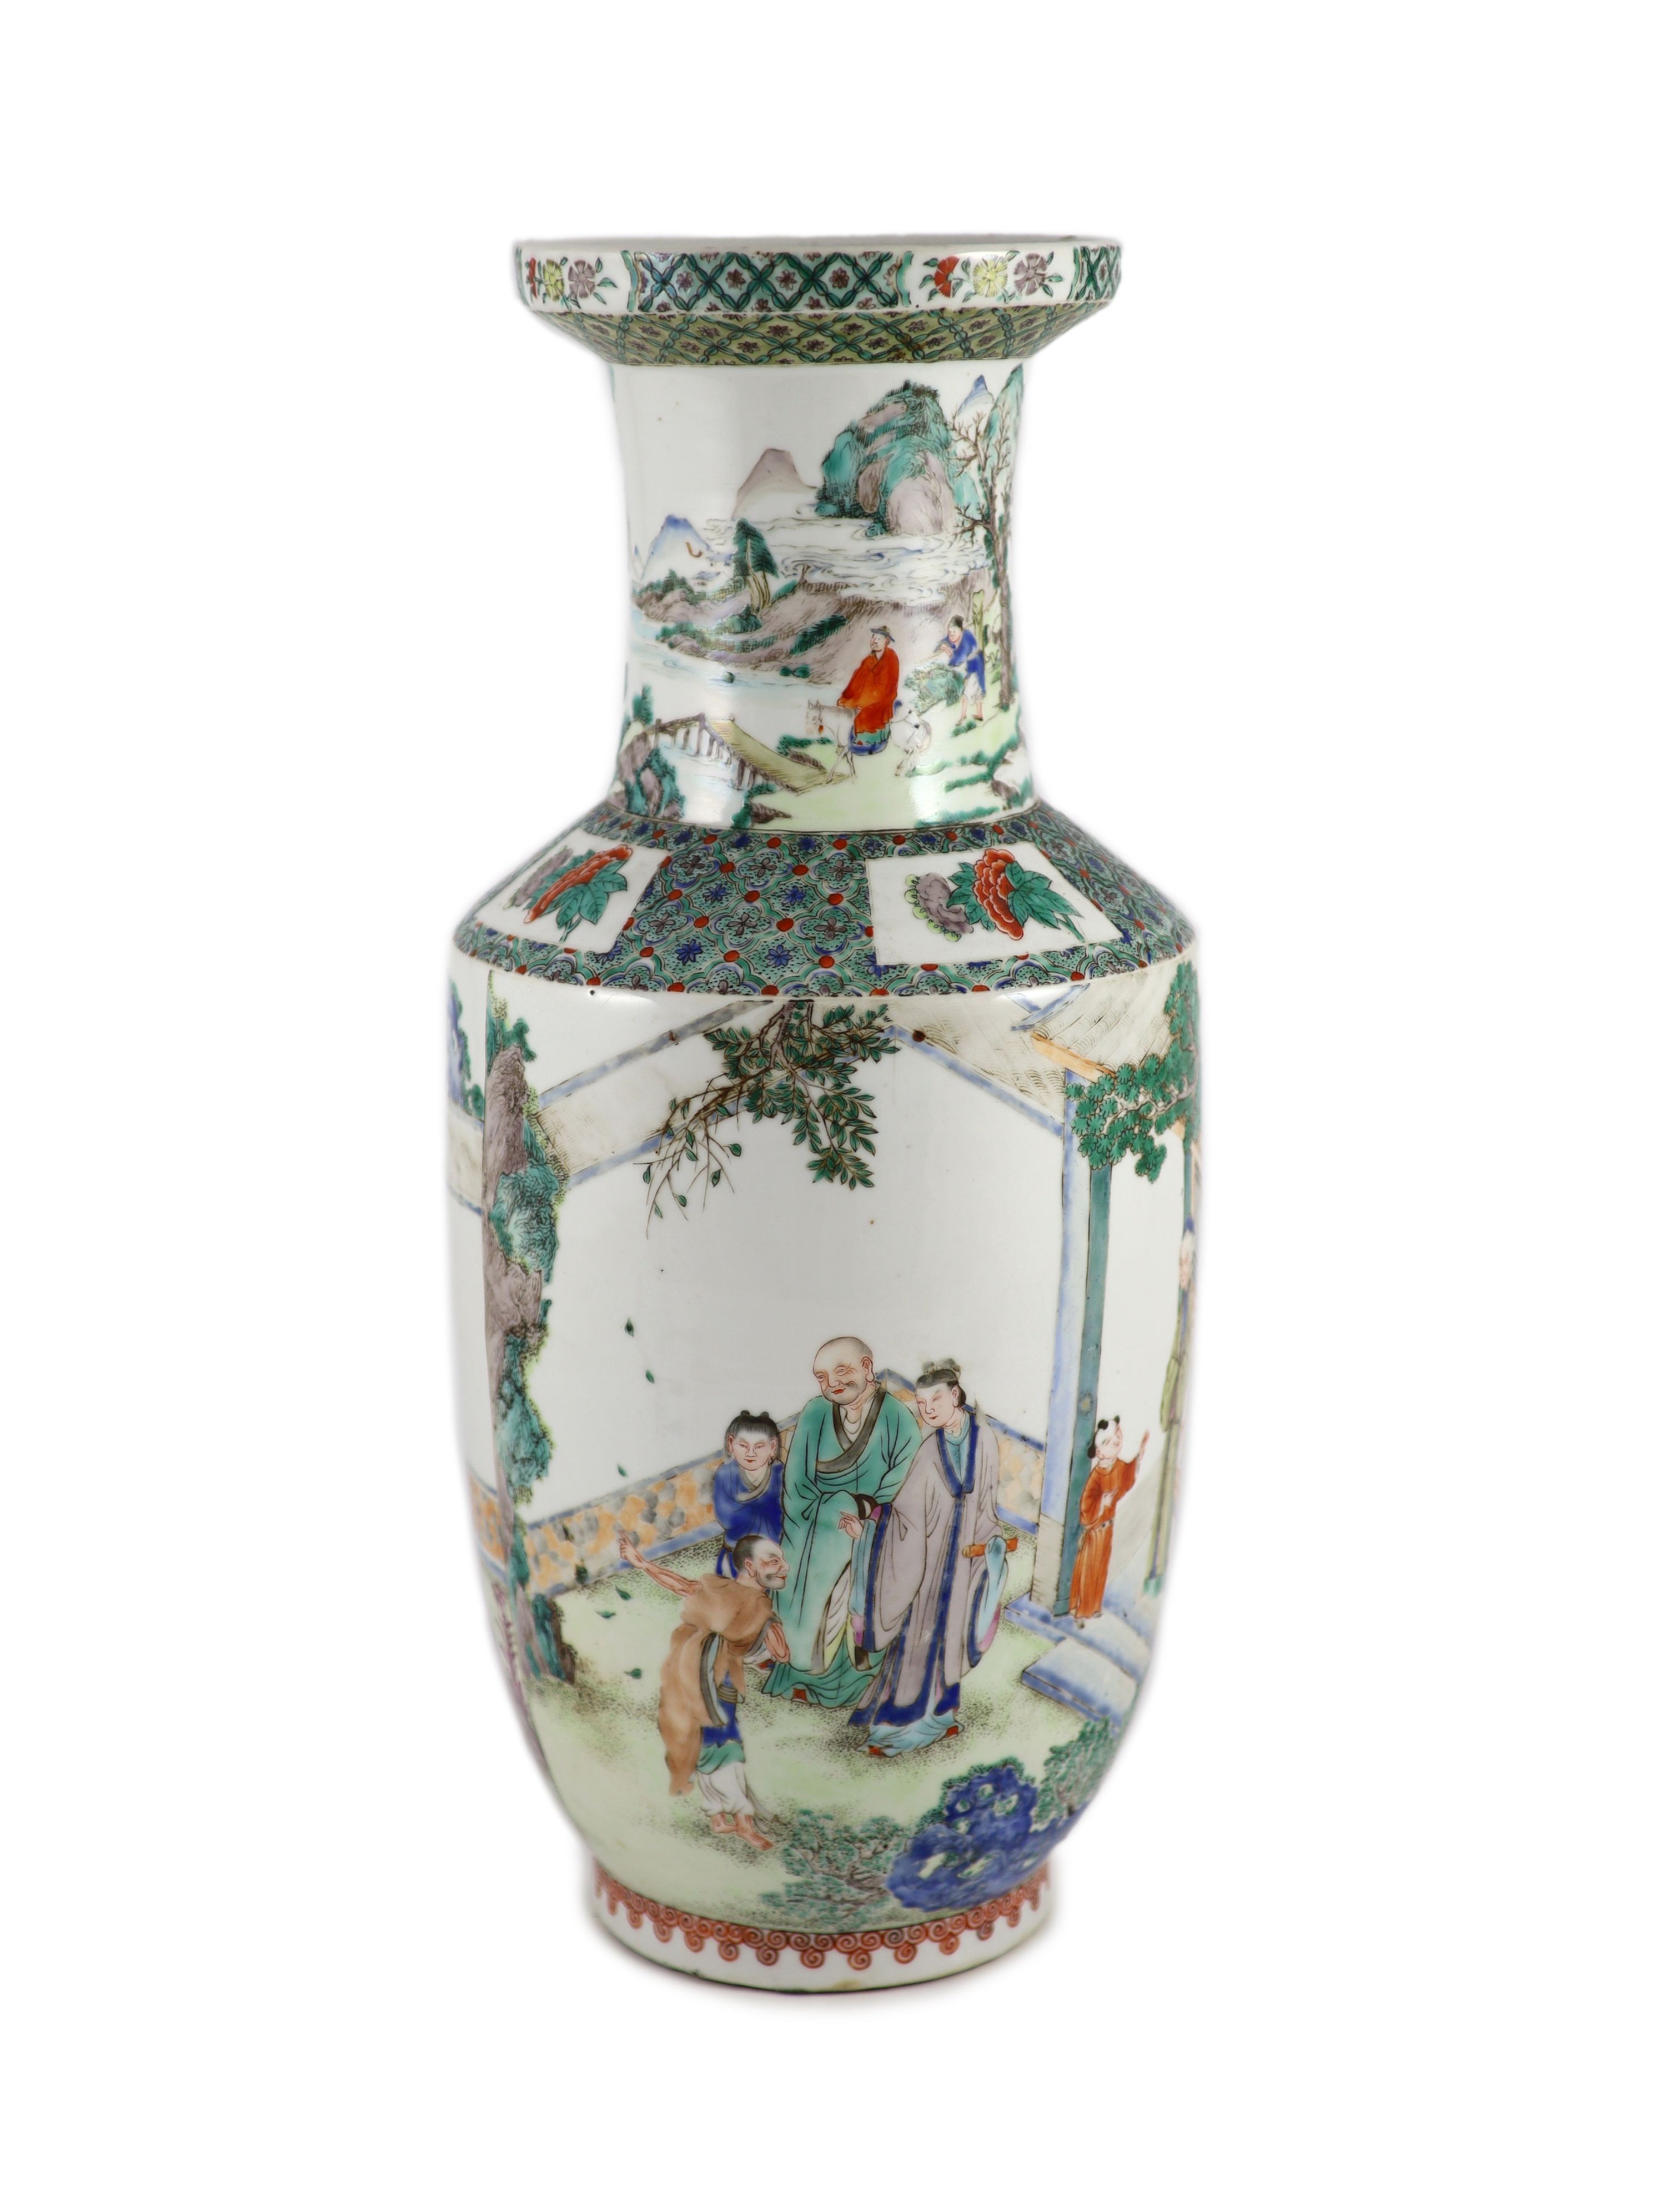 A Chinese famille verte rouleau vase, late 19th century,painted with figures amid garden